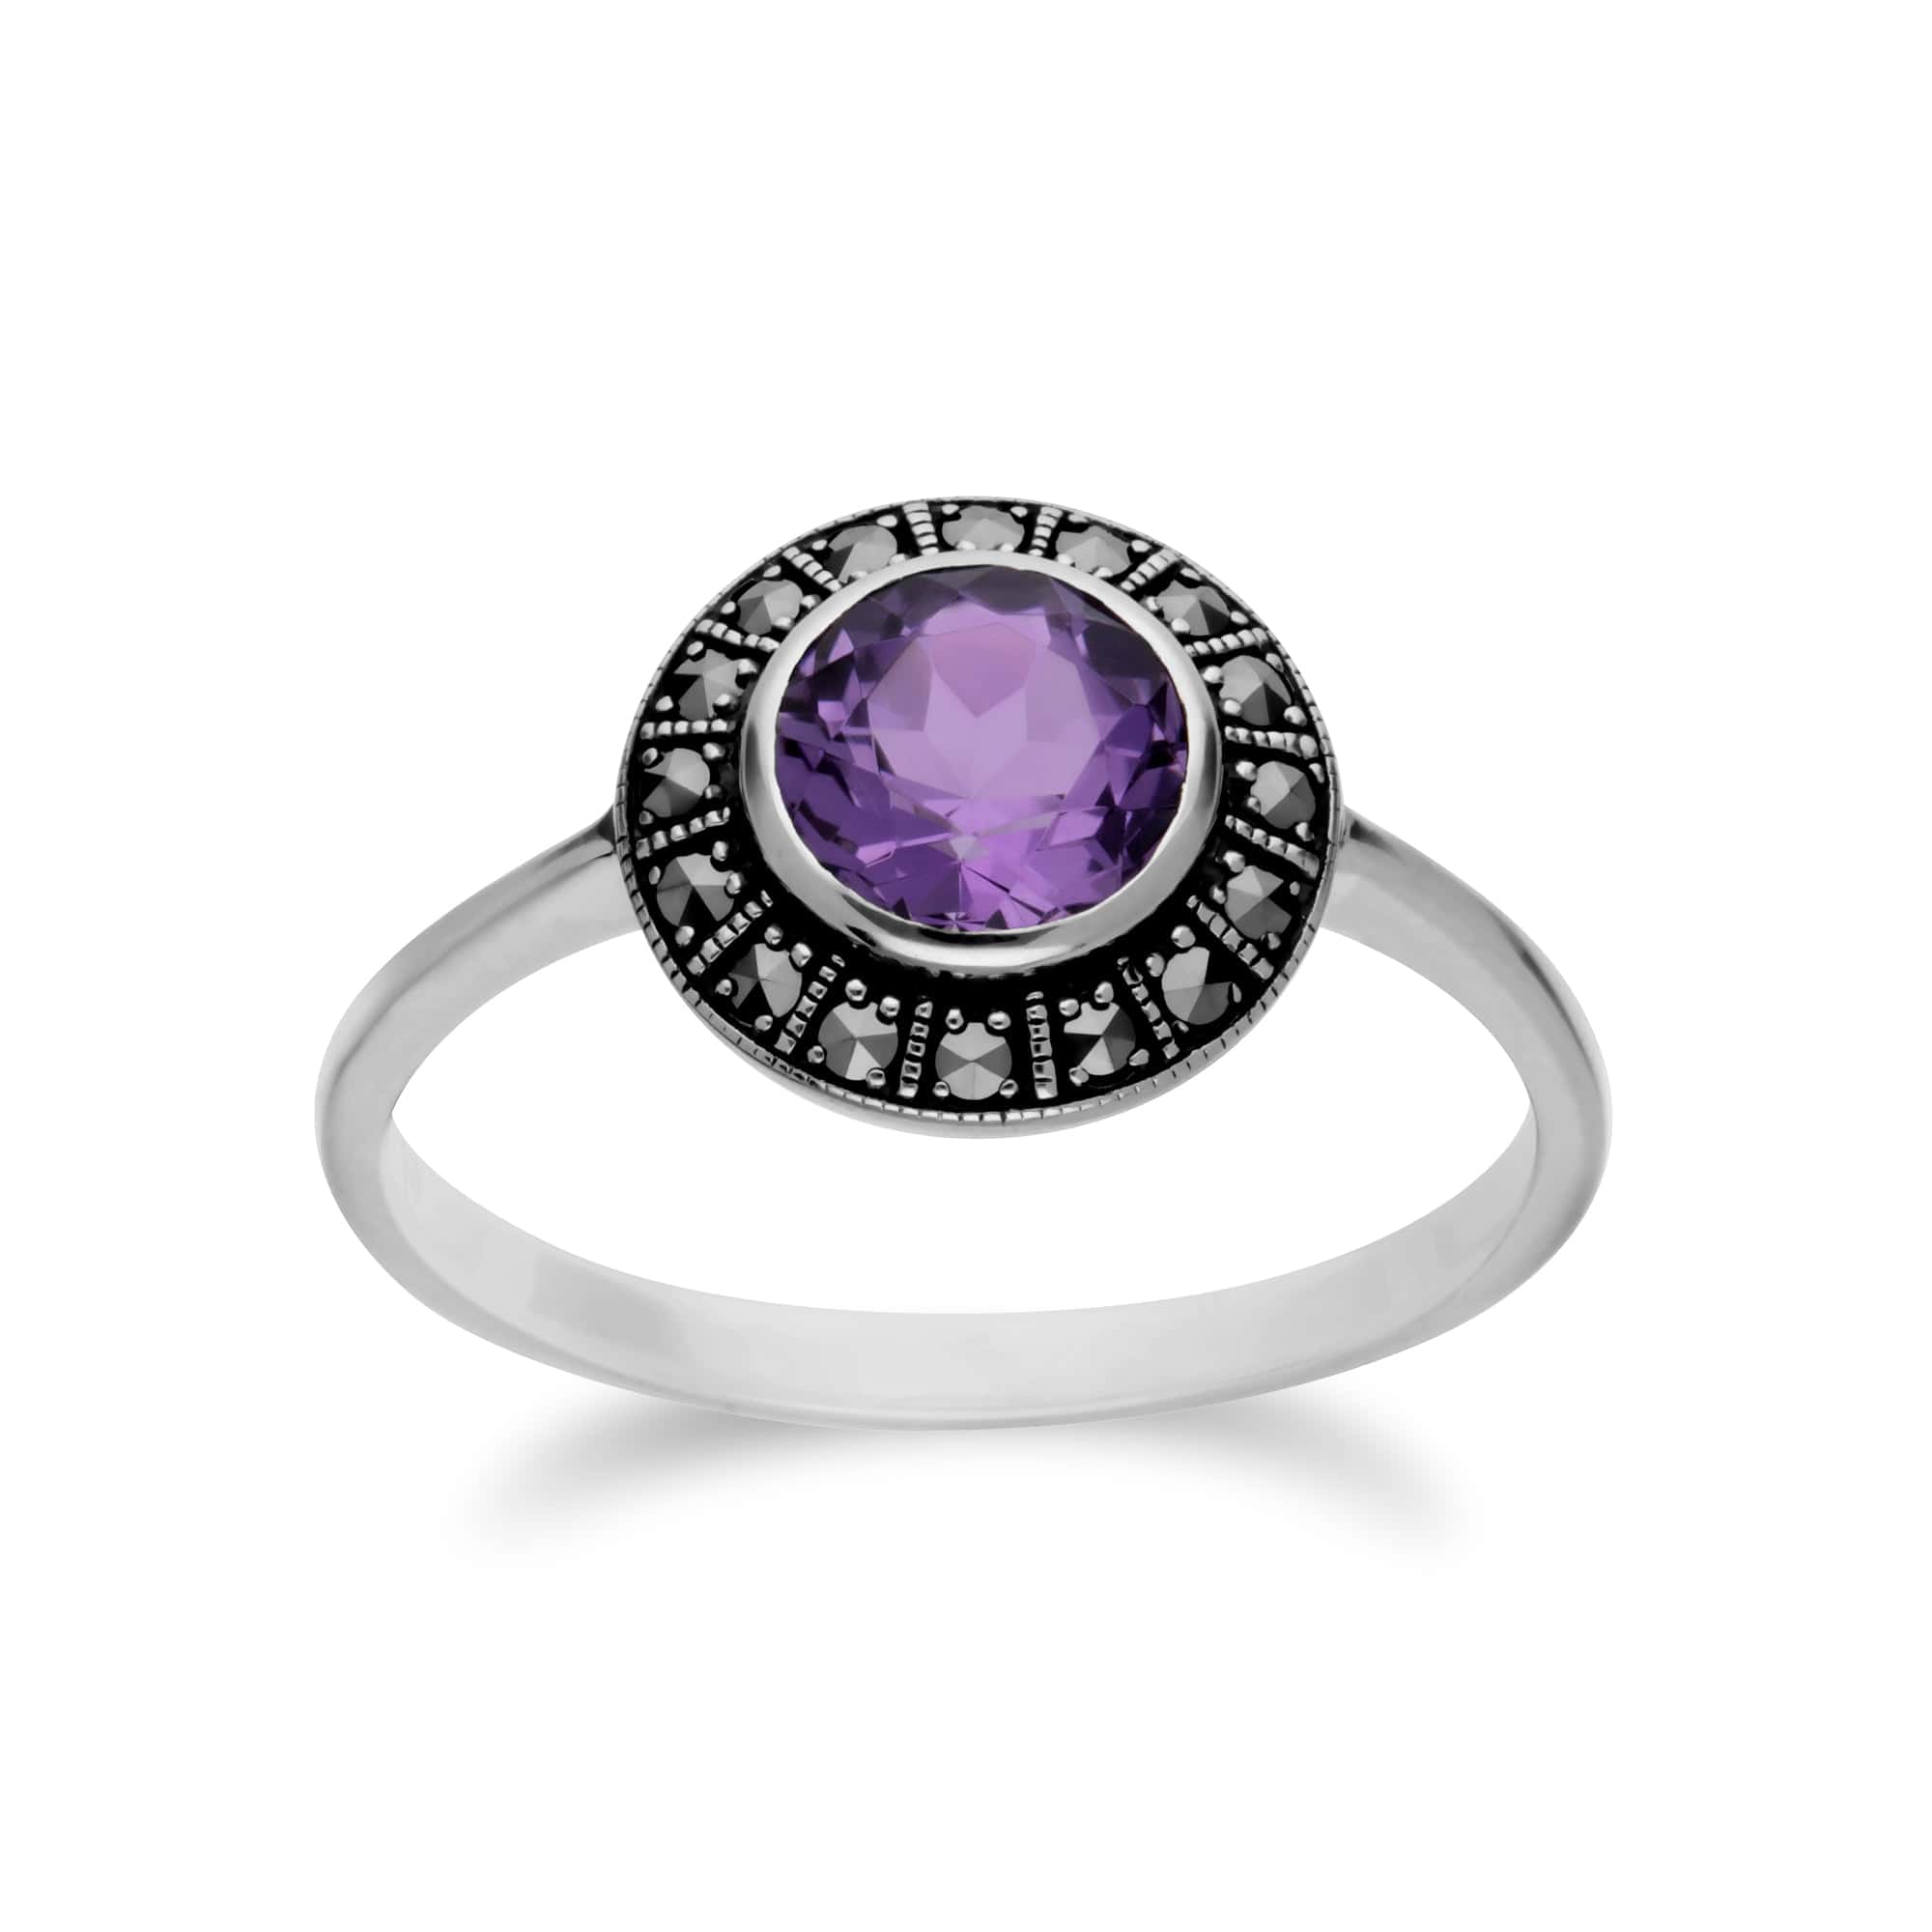 214R605601925 Art Deco Style Round Amethyst & Marcasite Halo Ring In Sterling Silver 1